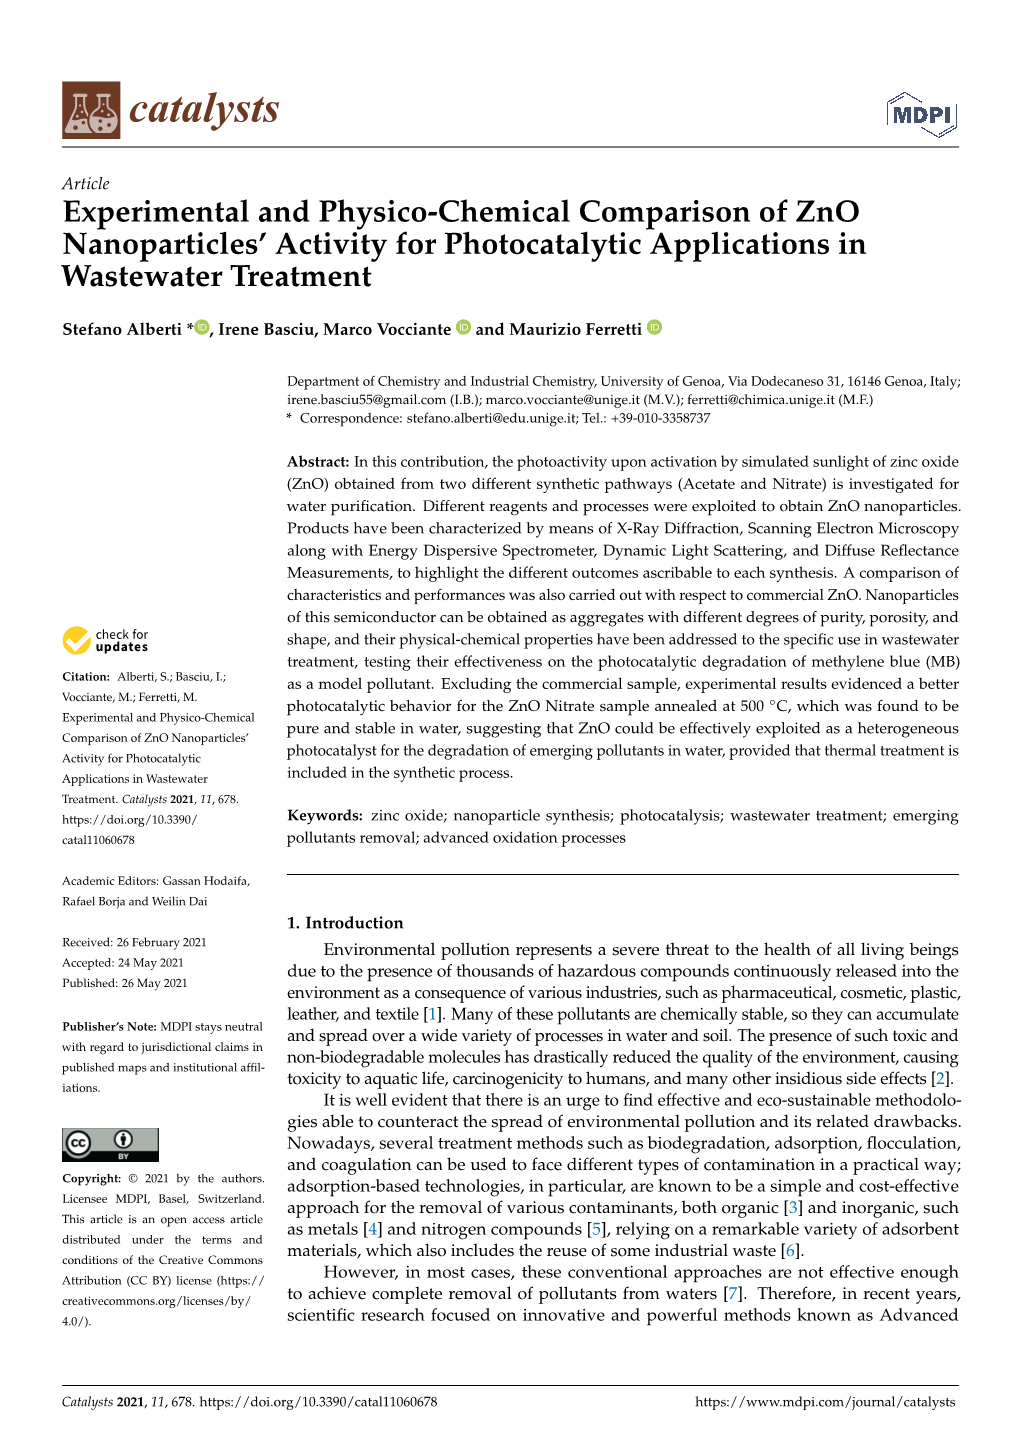 Experimental and Physico-Chemical Comparison of Zno Nanoparticles’ Activity for Photocatalytic Applications in Wastewater Treatment